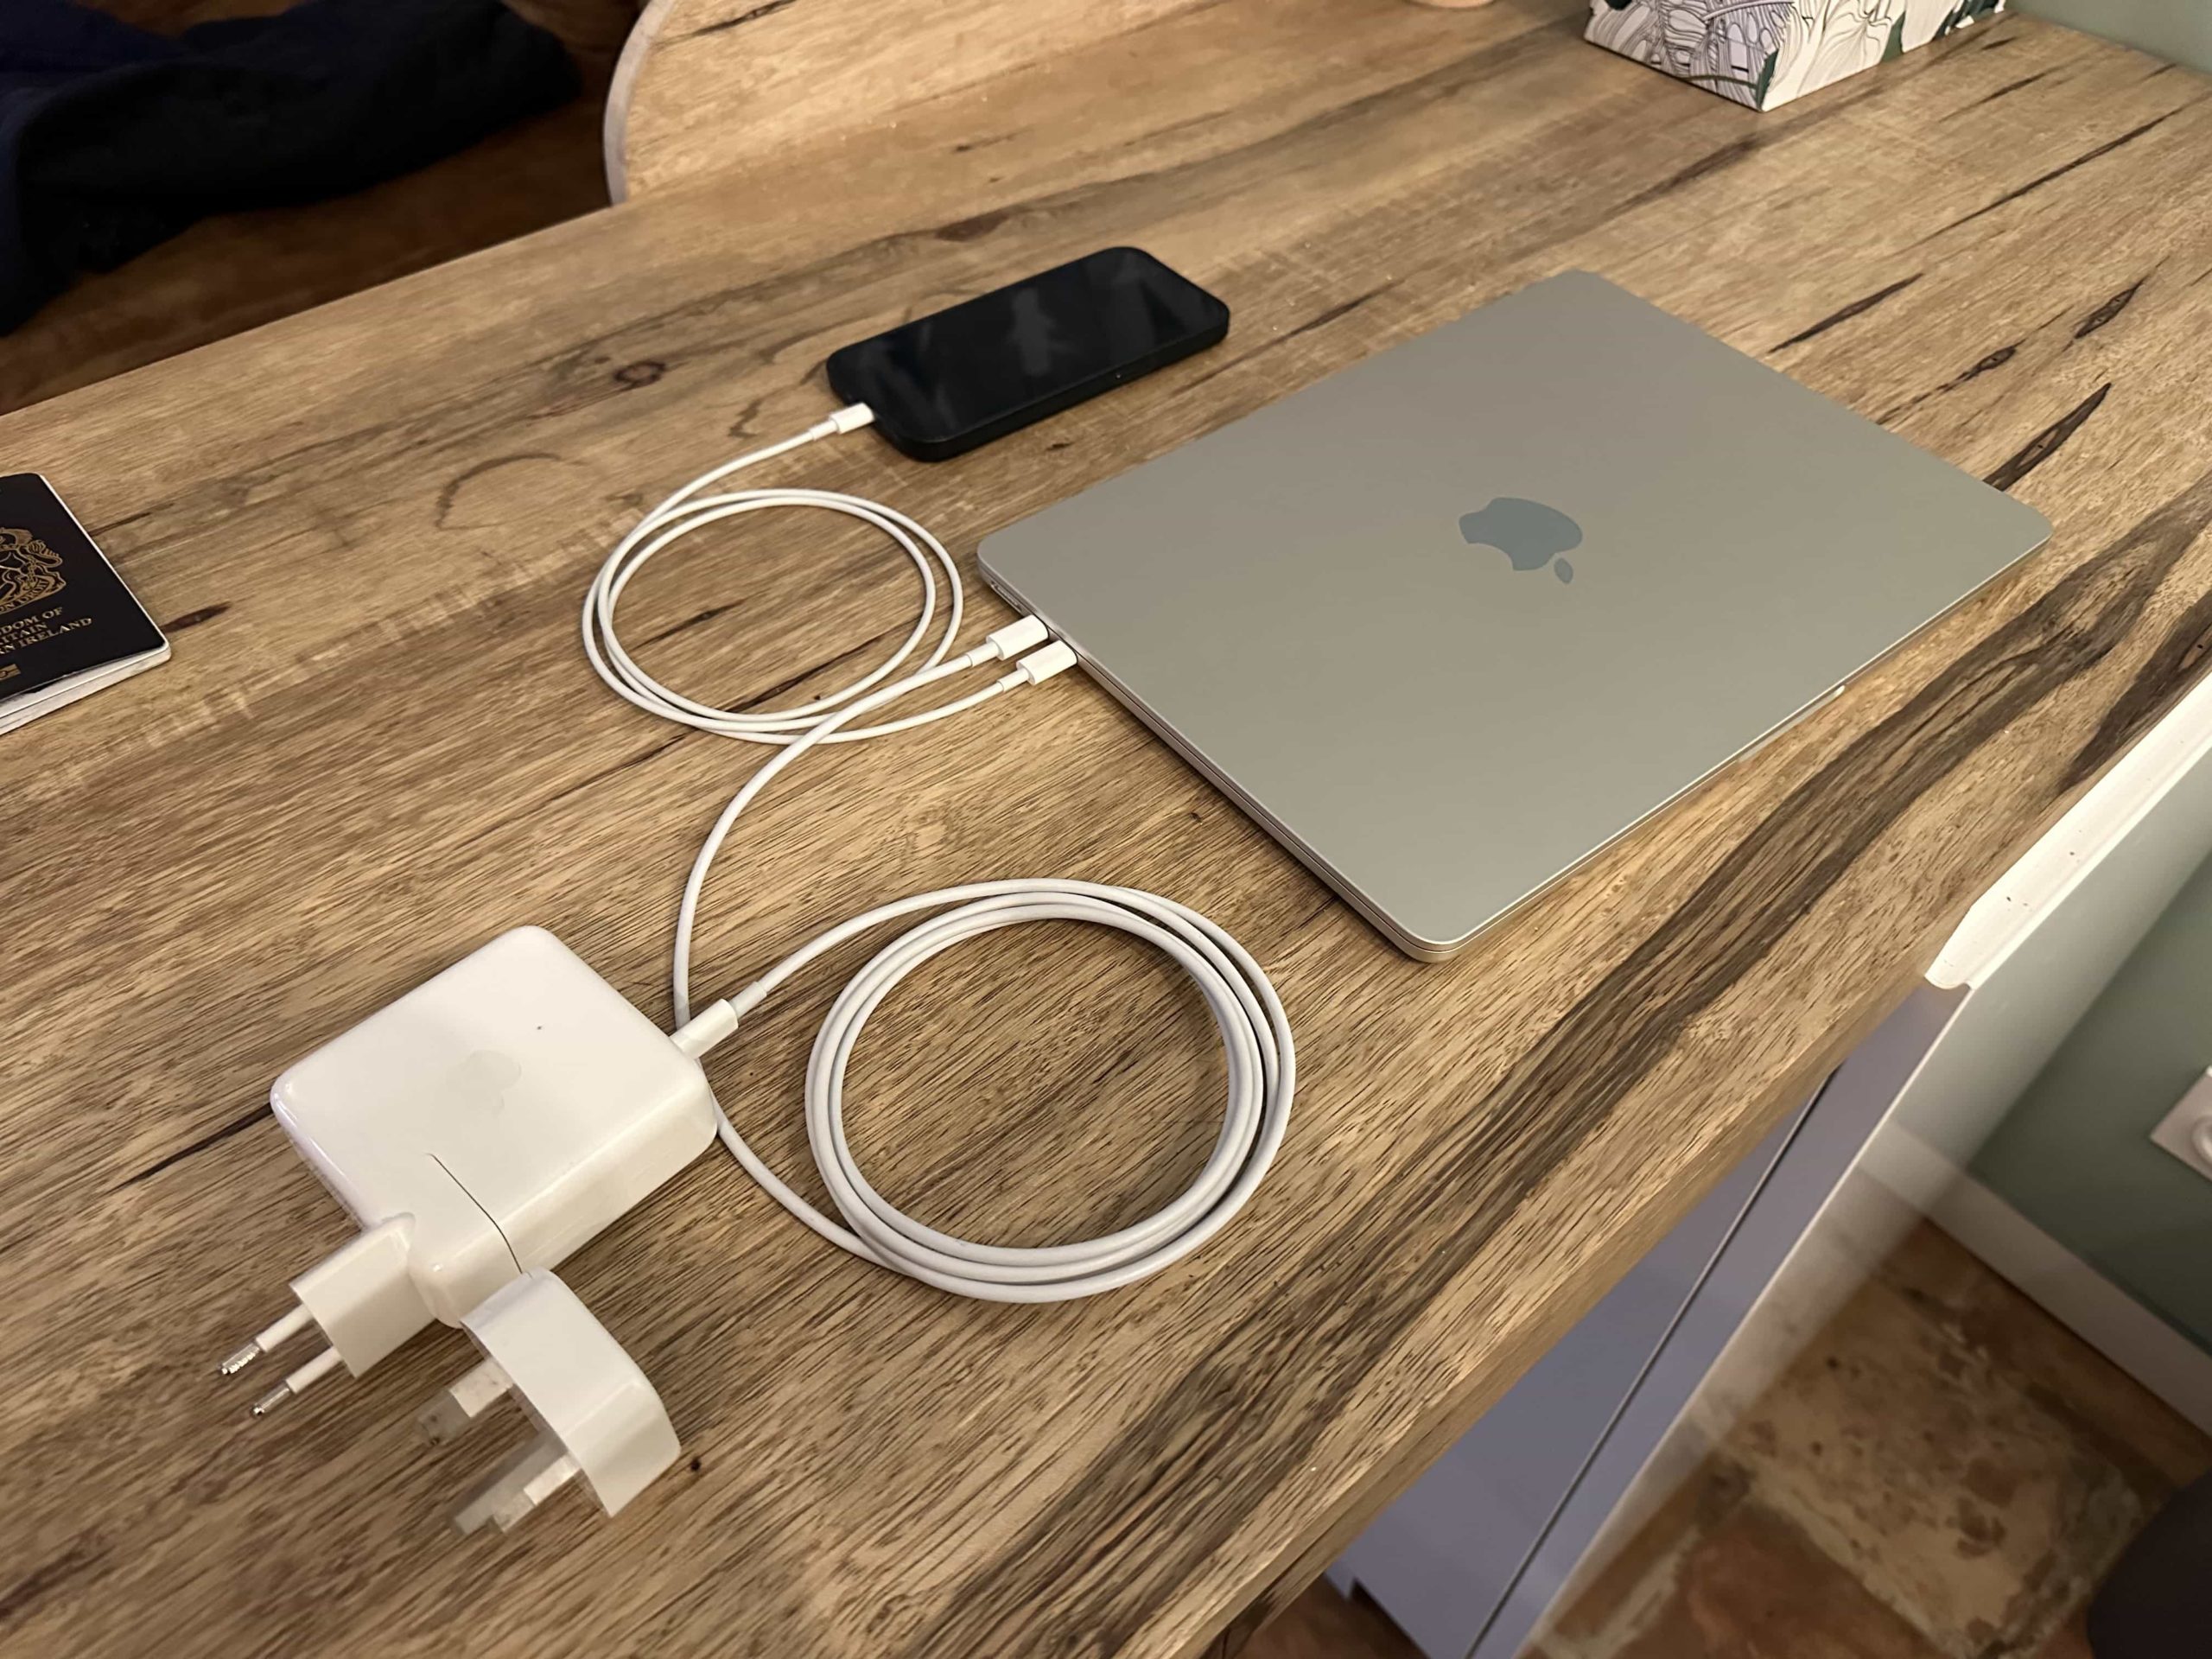 A MacBook, charging cables and adapters, and a phone atop a kitchen countertop